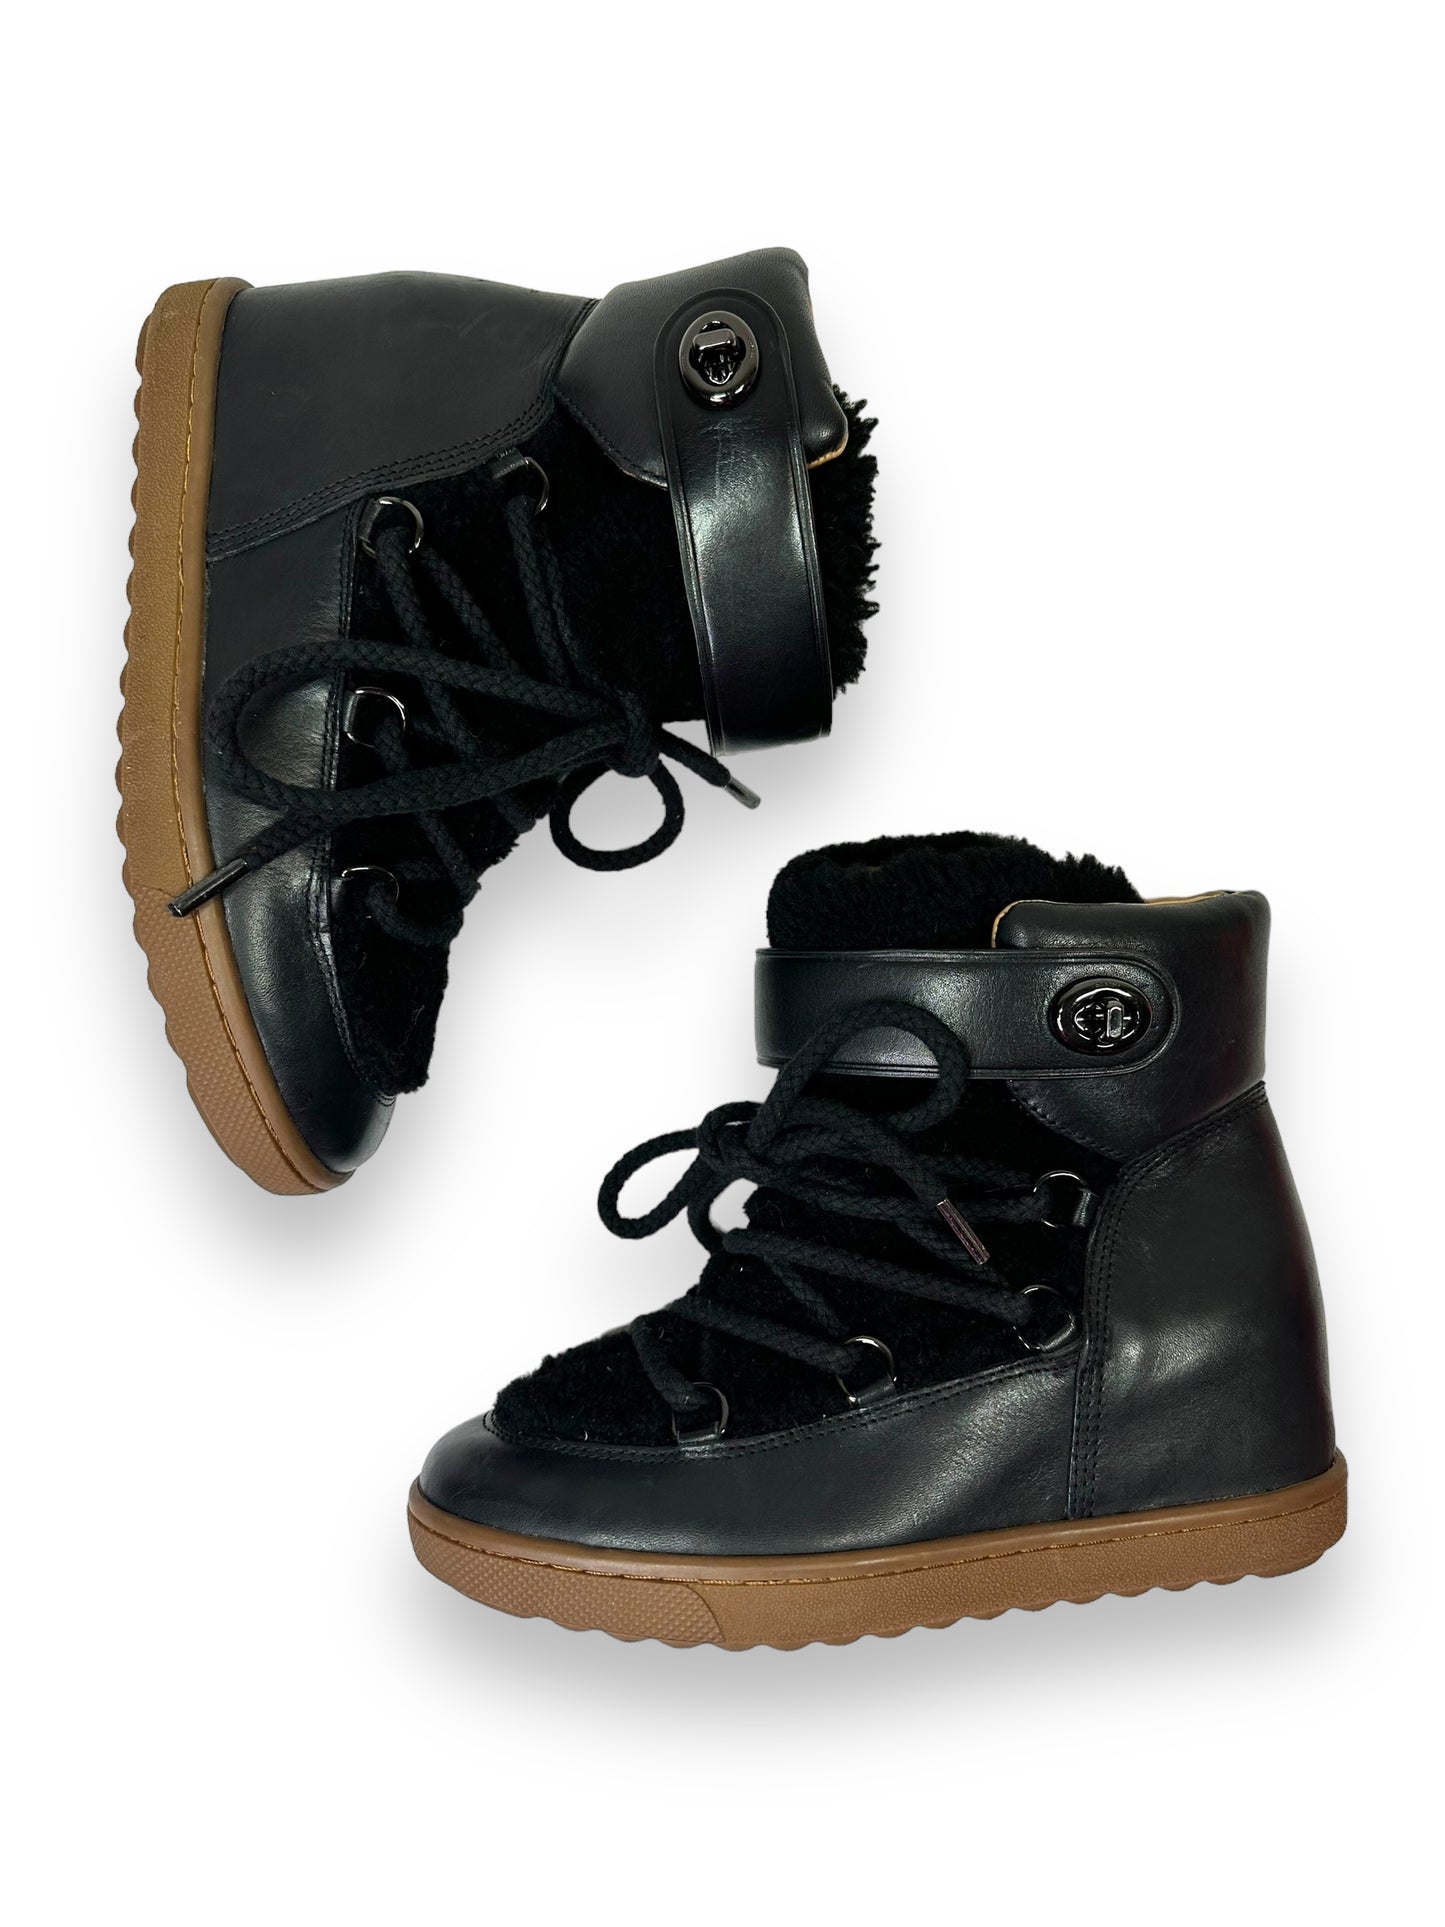 Trend: Coach Kiss Lock Shearling Boots